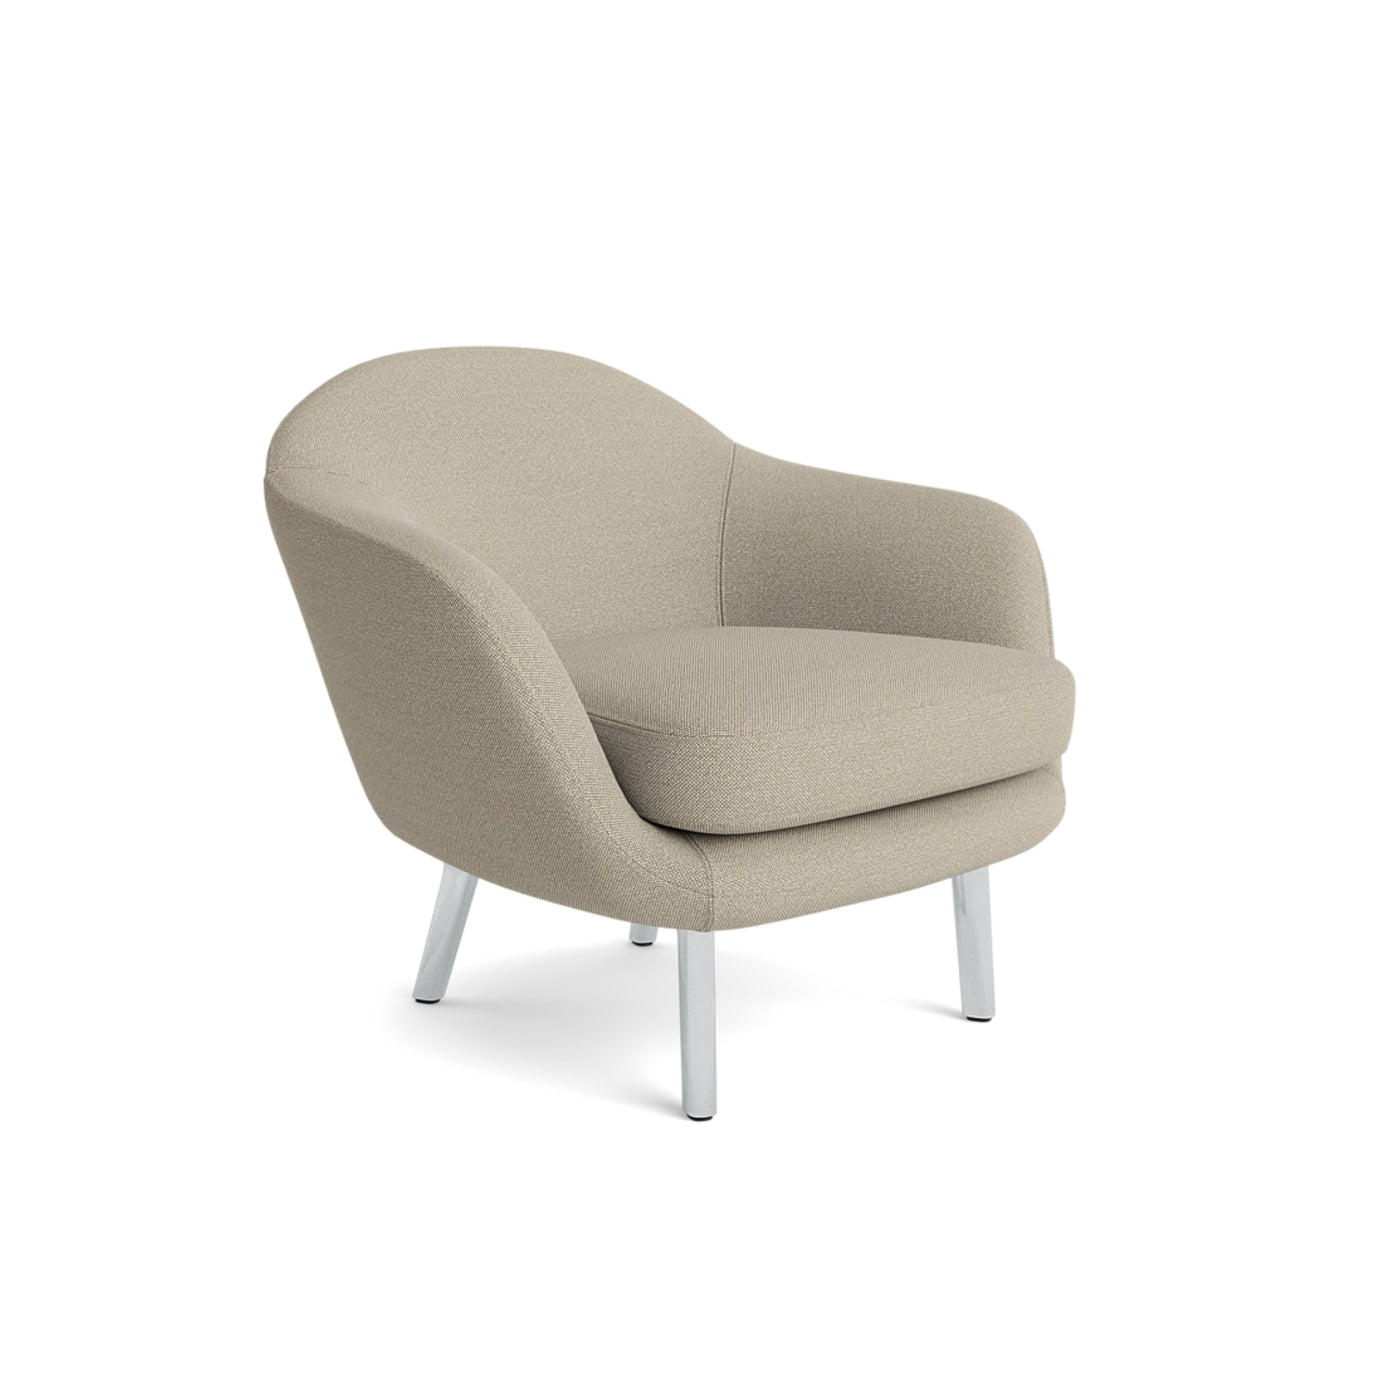 Normann Copenhagen Sum Armchair. Made to order at someday designs. #colour_hallingdal-220